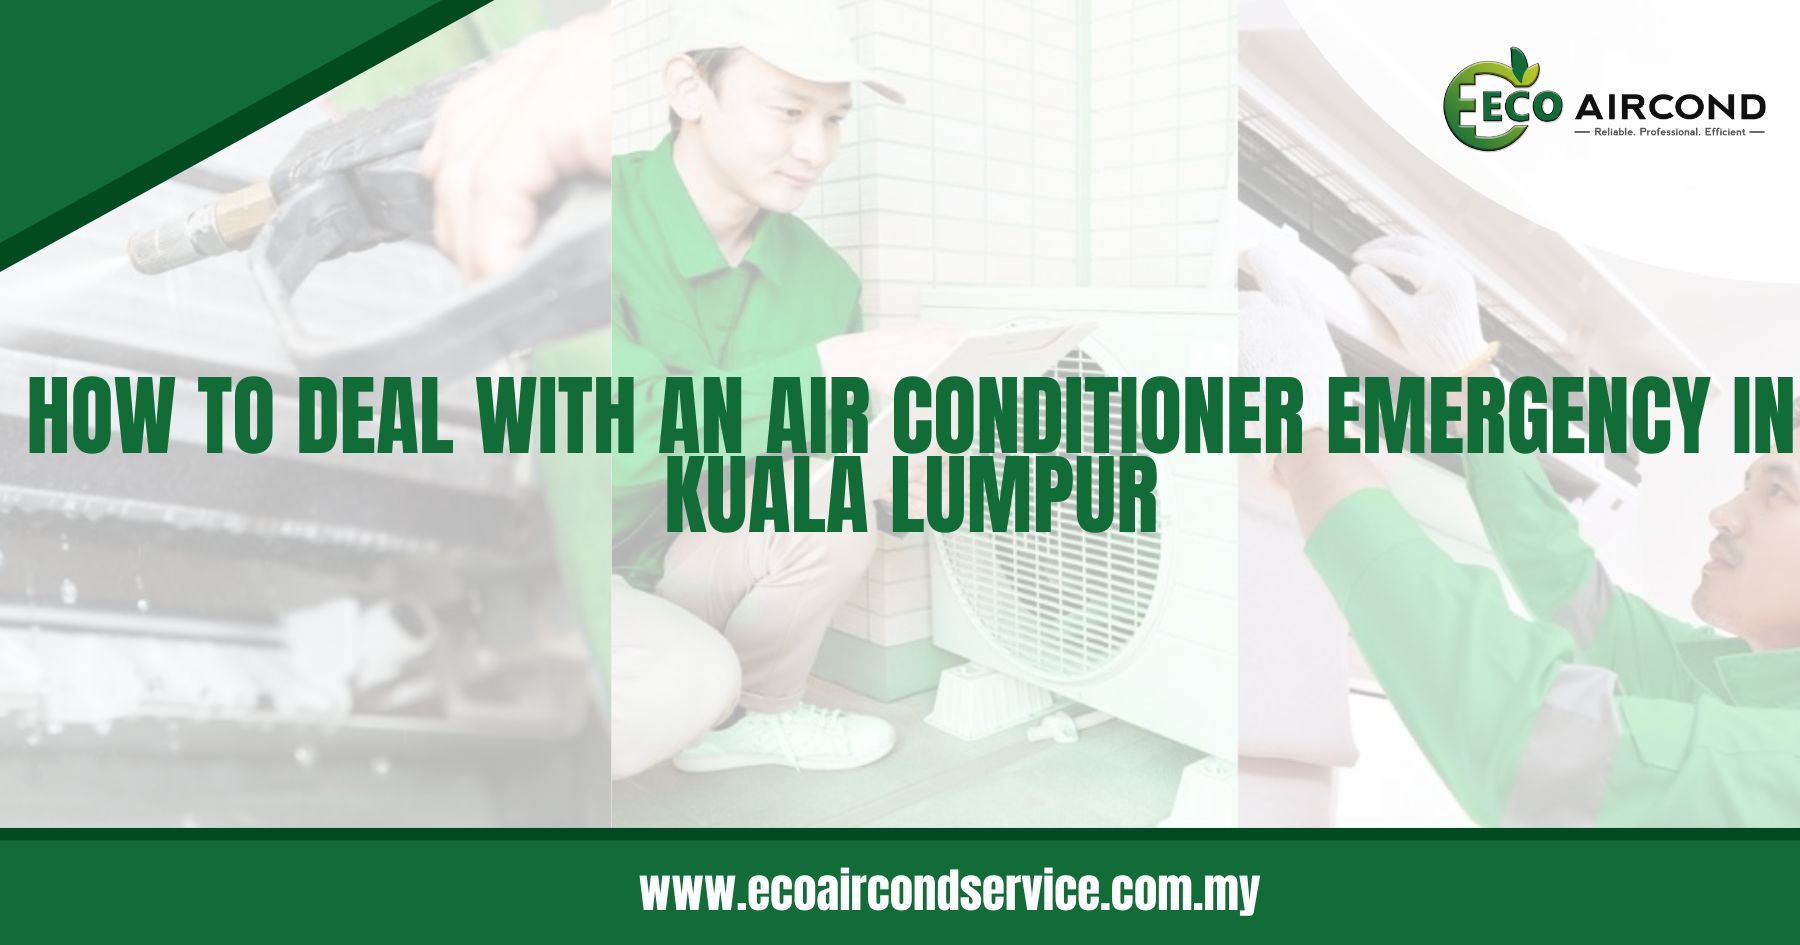 How To Deal with an Air Conditioner Emergency in Kuala Lumpur